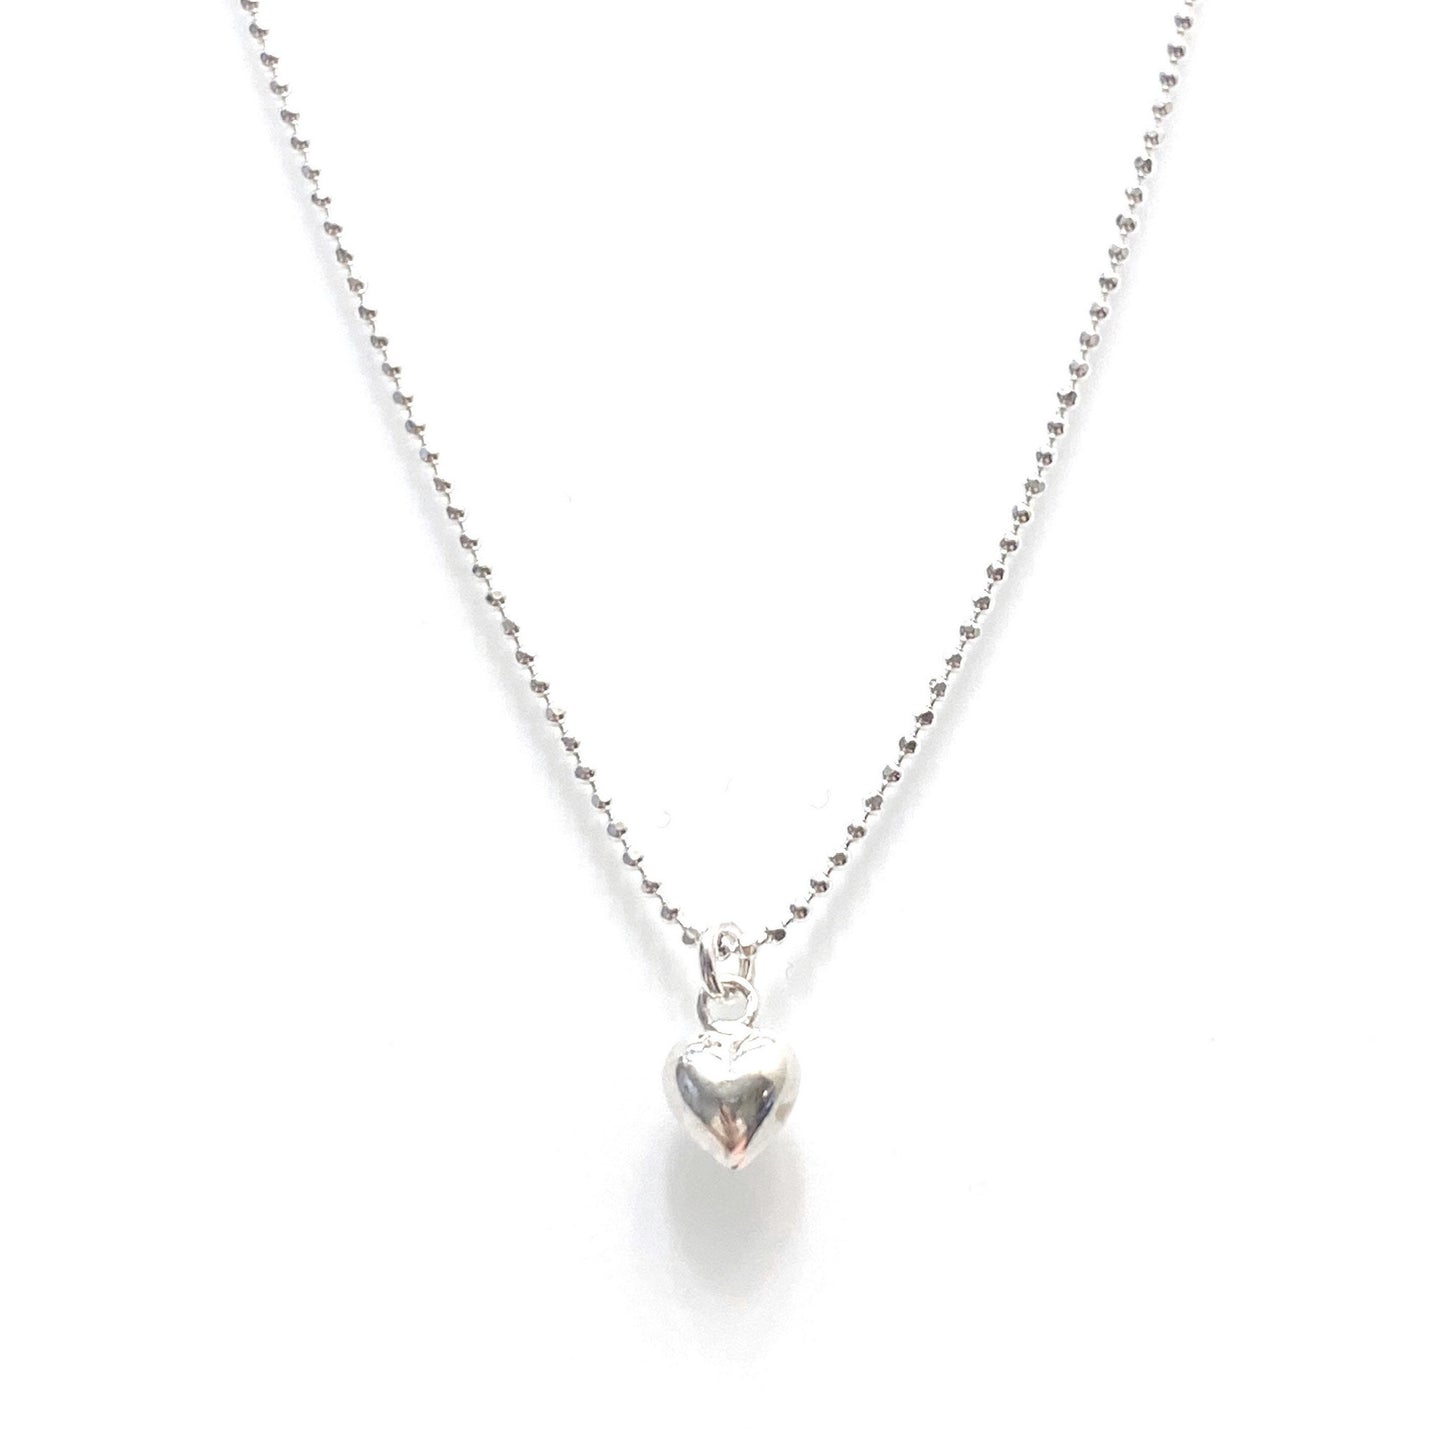 Petite puffy heart necklace in sterling silver